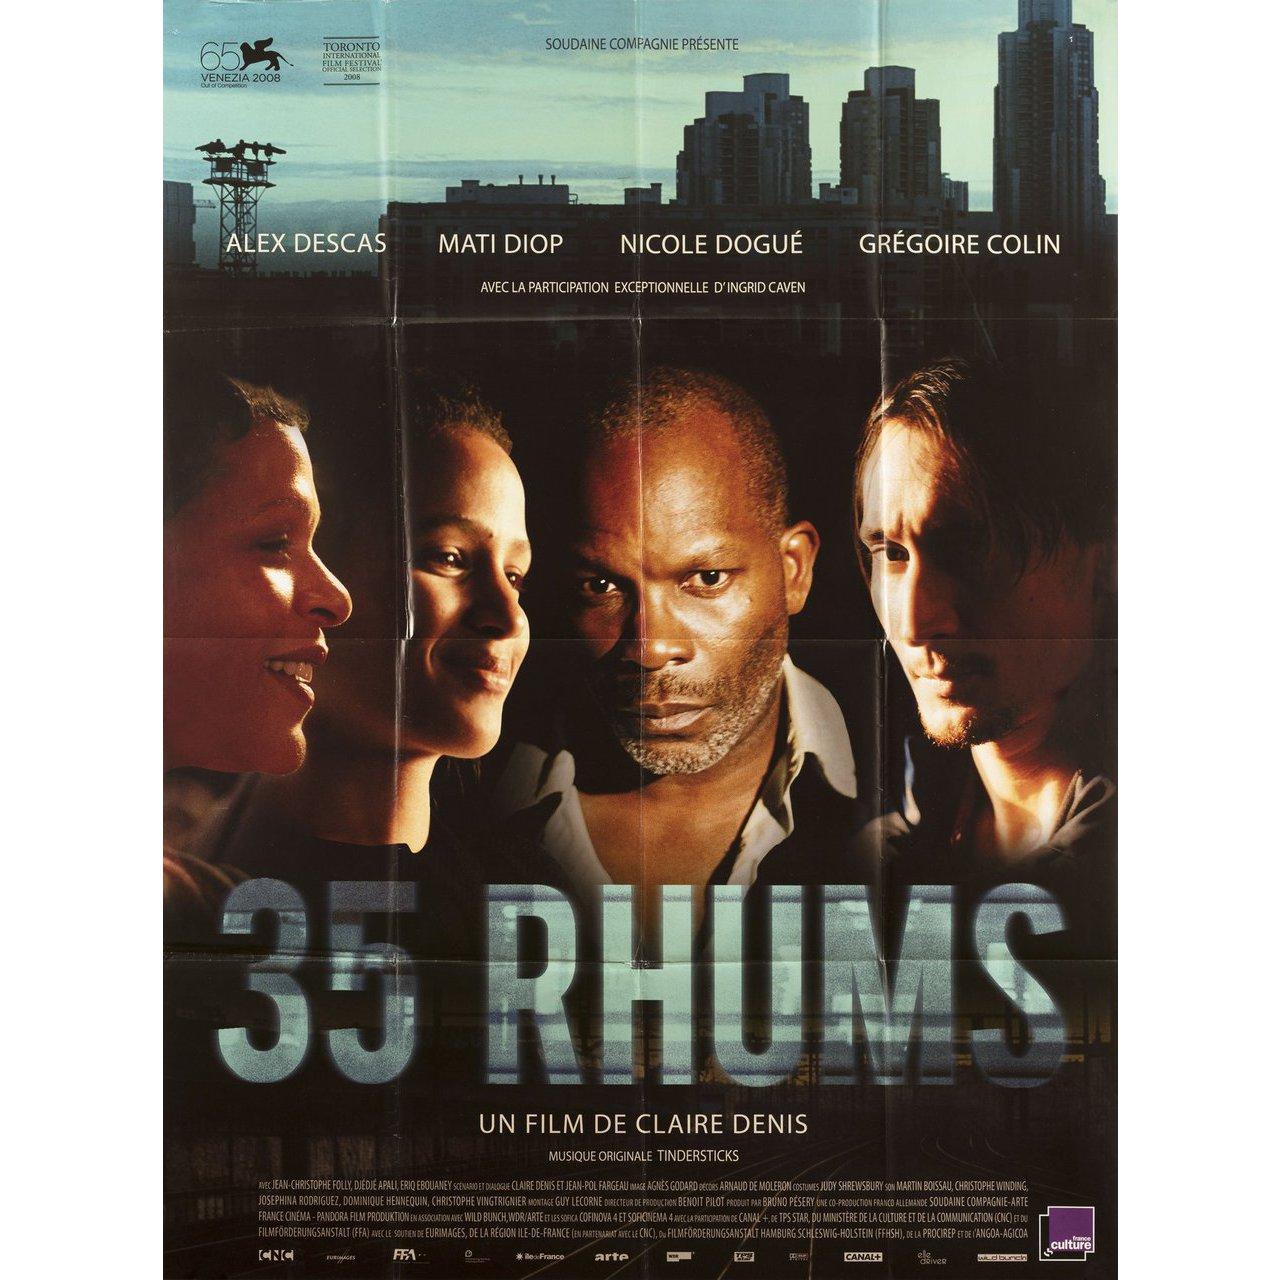 Original 2008 French grande poster for the film 35 Shots of Rum (35 Rhums) directed by Claire Denis with Alex Descas / Mati Diop / Nicole Dogue / Gregoire Colin. Very Good-Fine condition, folded. Many original posters were issued folded or were